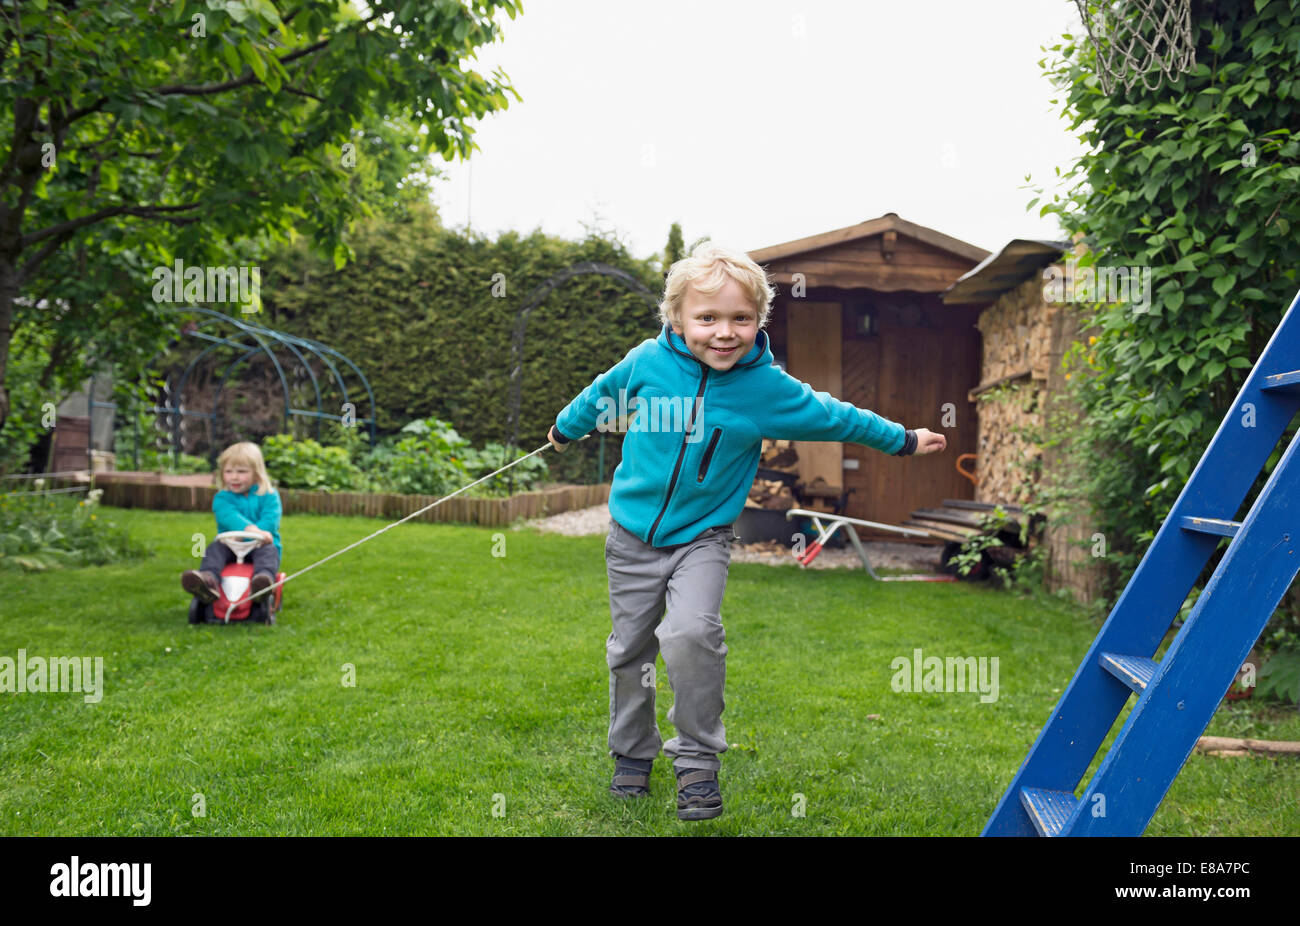 Older brother pulling sister on toy car in garden Stock Photo